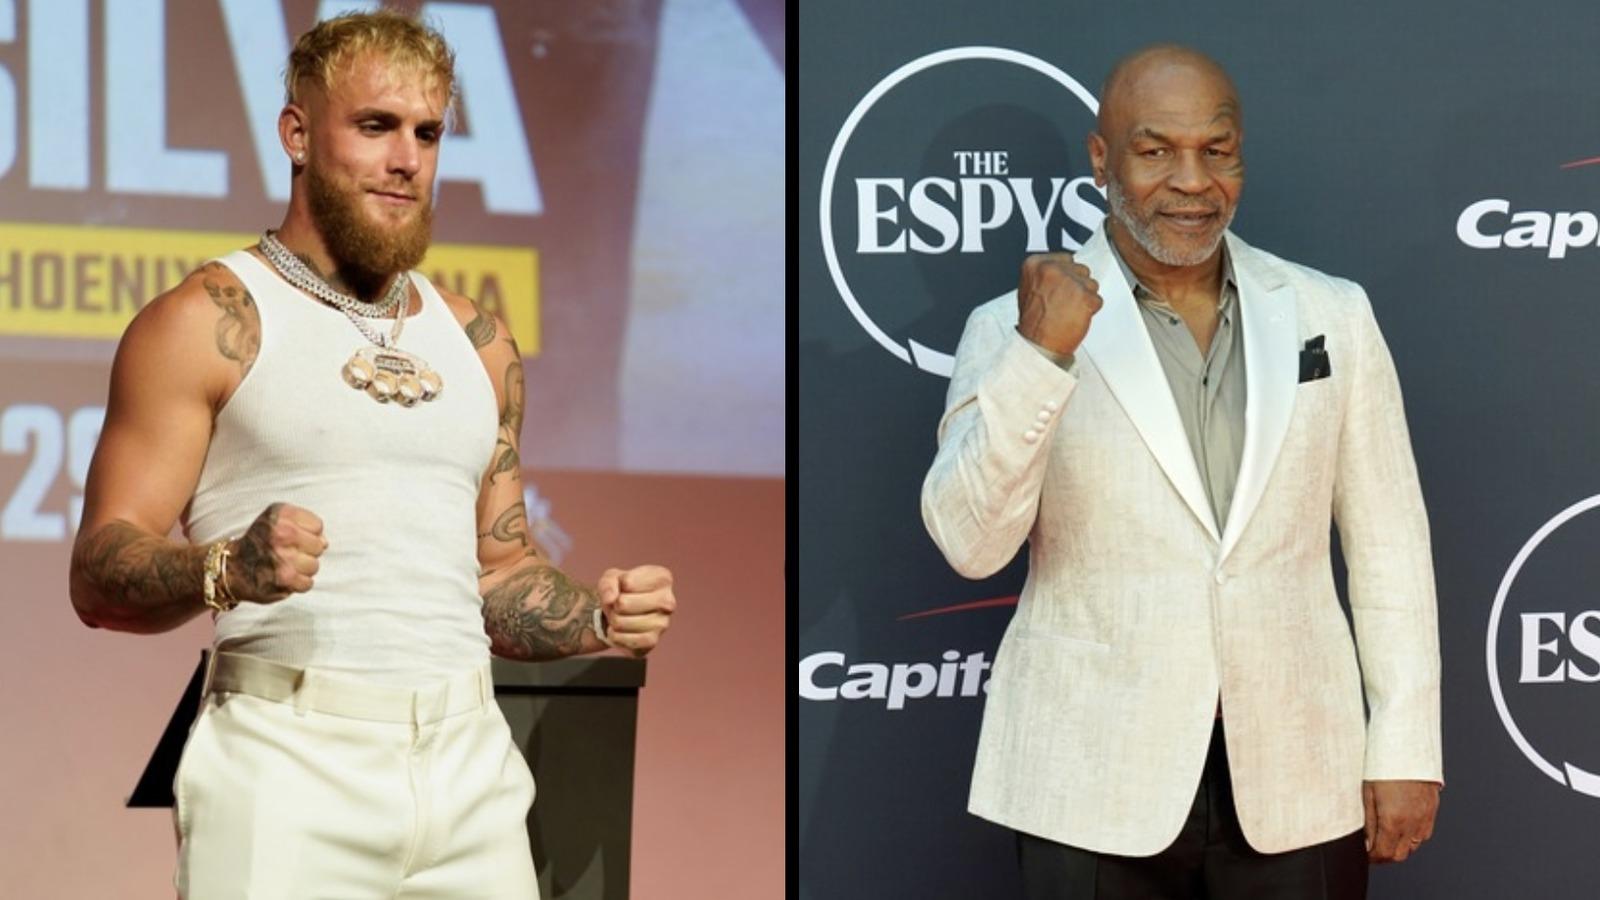 Jake Paul is utilizing a creative strategy ahead of his boxing match with Mike Tyson